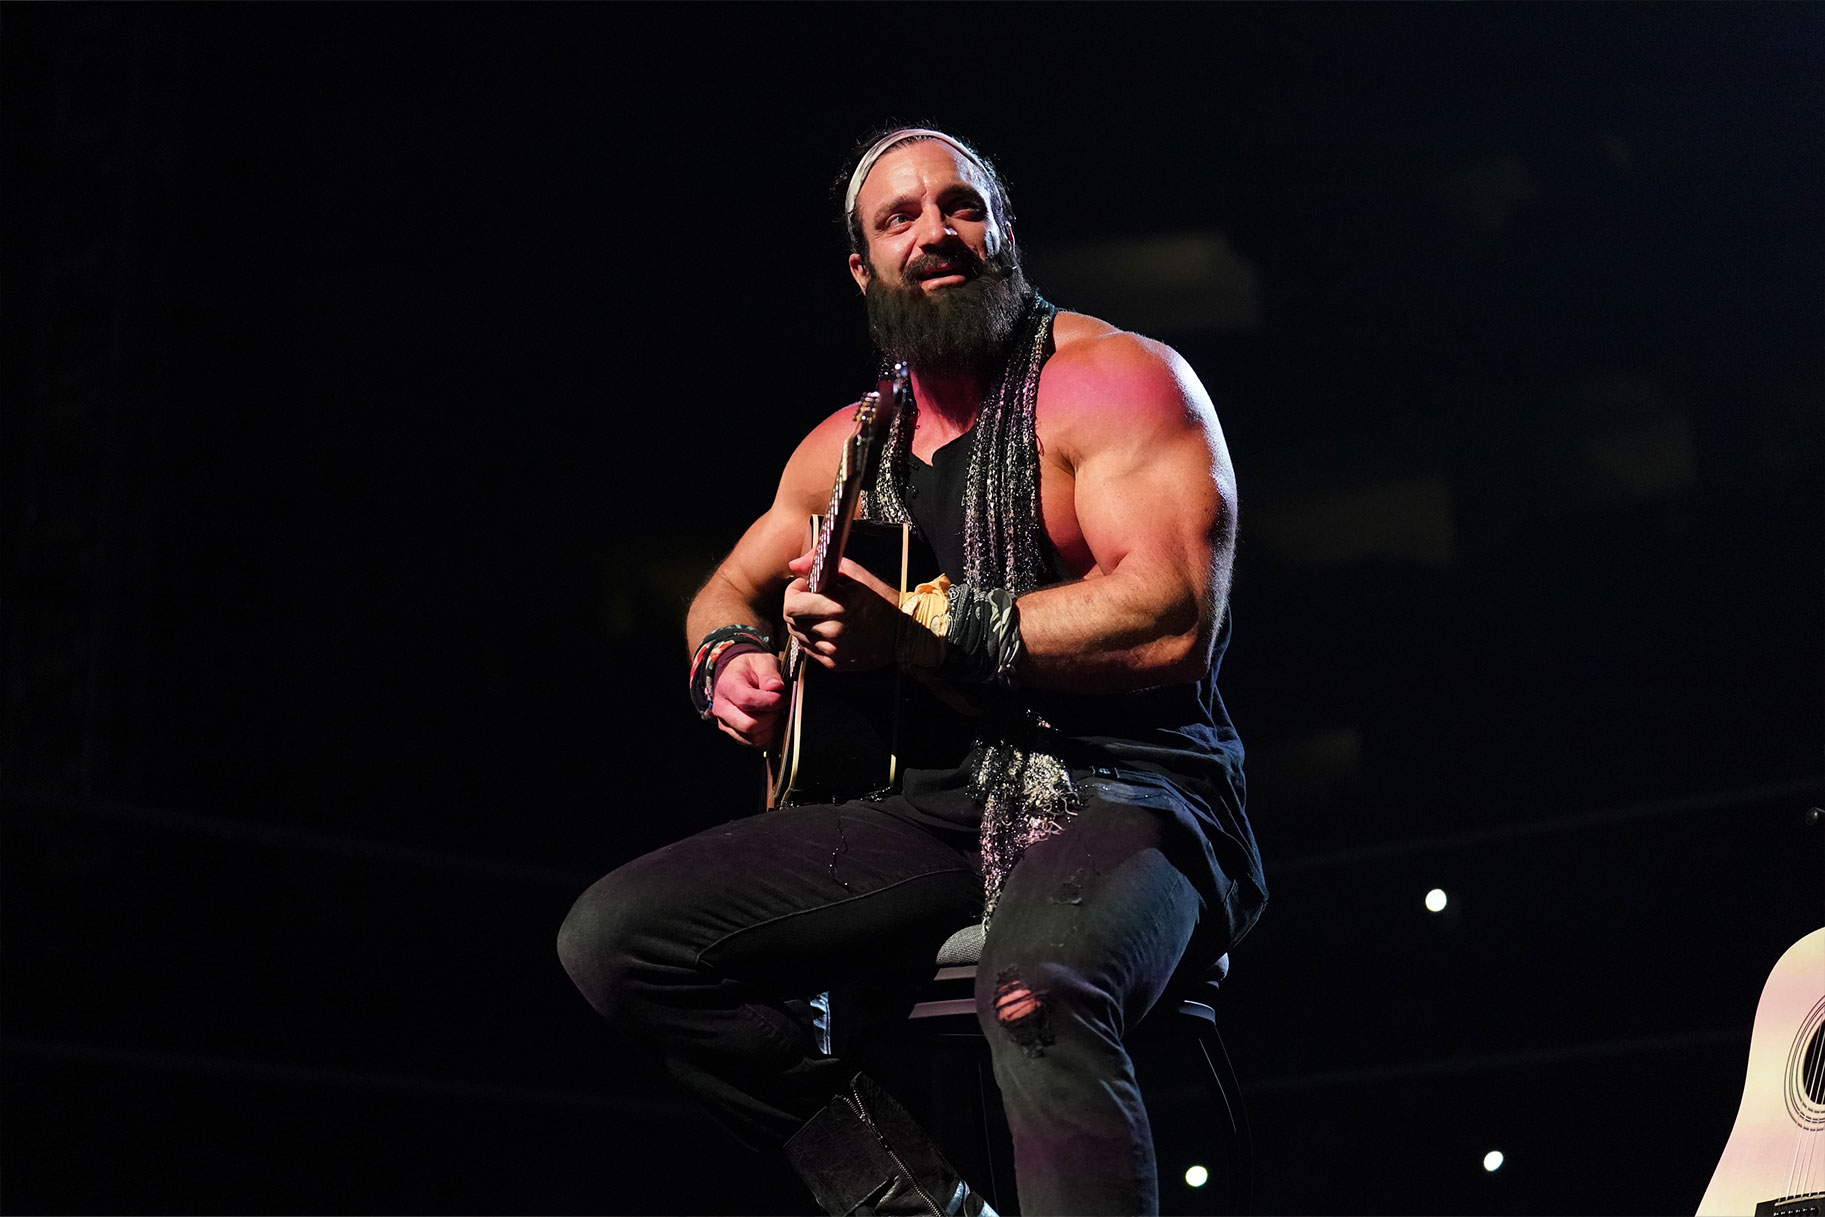 Elias playing guitar in the ring